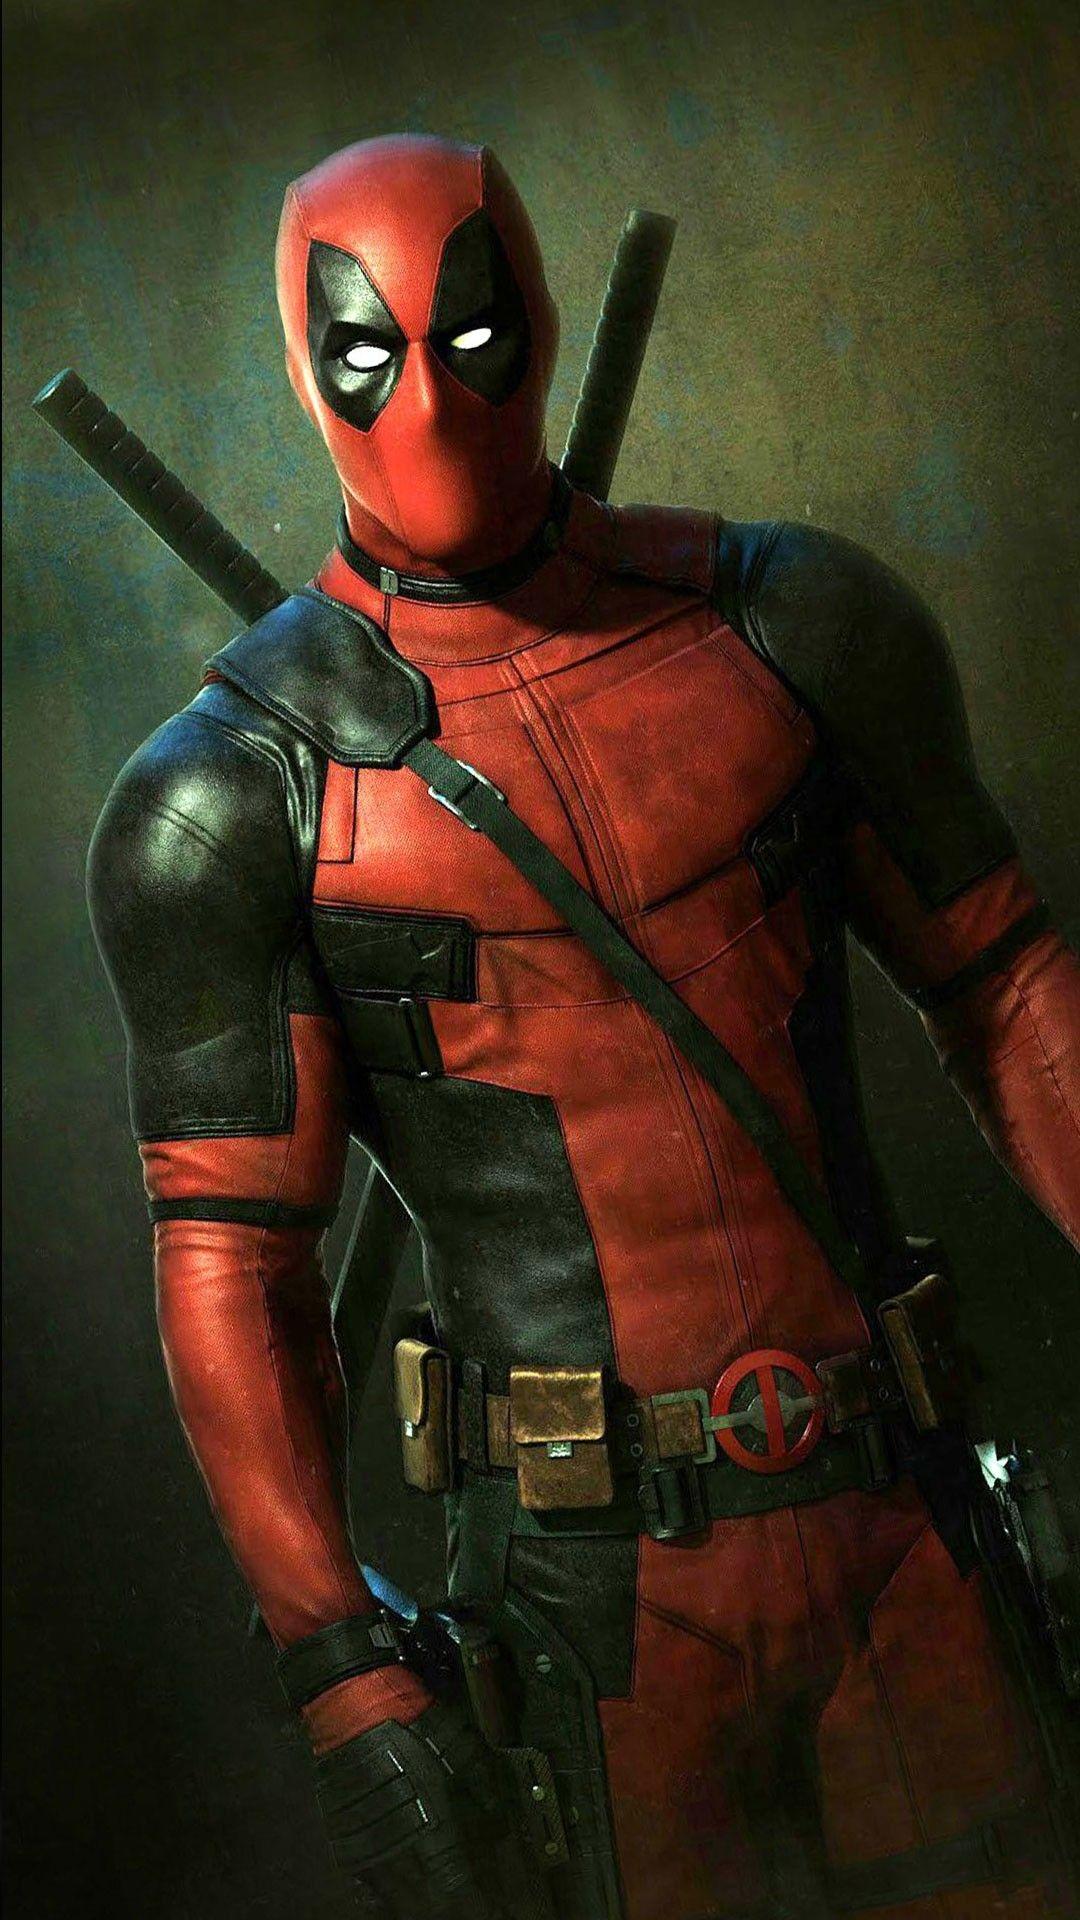 Deadpool 2 Iphone Wallpapers Top Free Deadpool 2 Iphone Backgrounds Wallpaperaccess - image for latest best iphone wallpapers setup roblox deadpool hd wallpaper for iphone 699x1244 download hd wallpaper wallpapertip